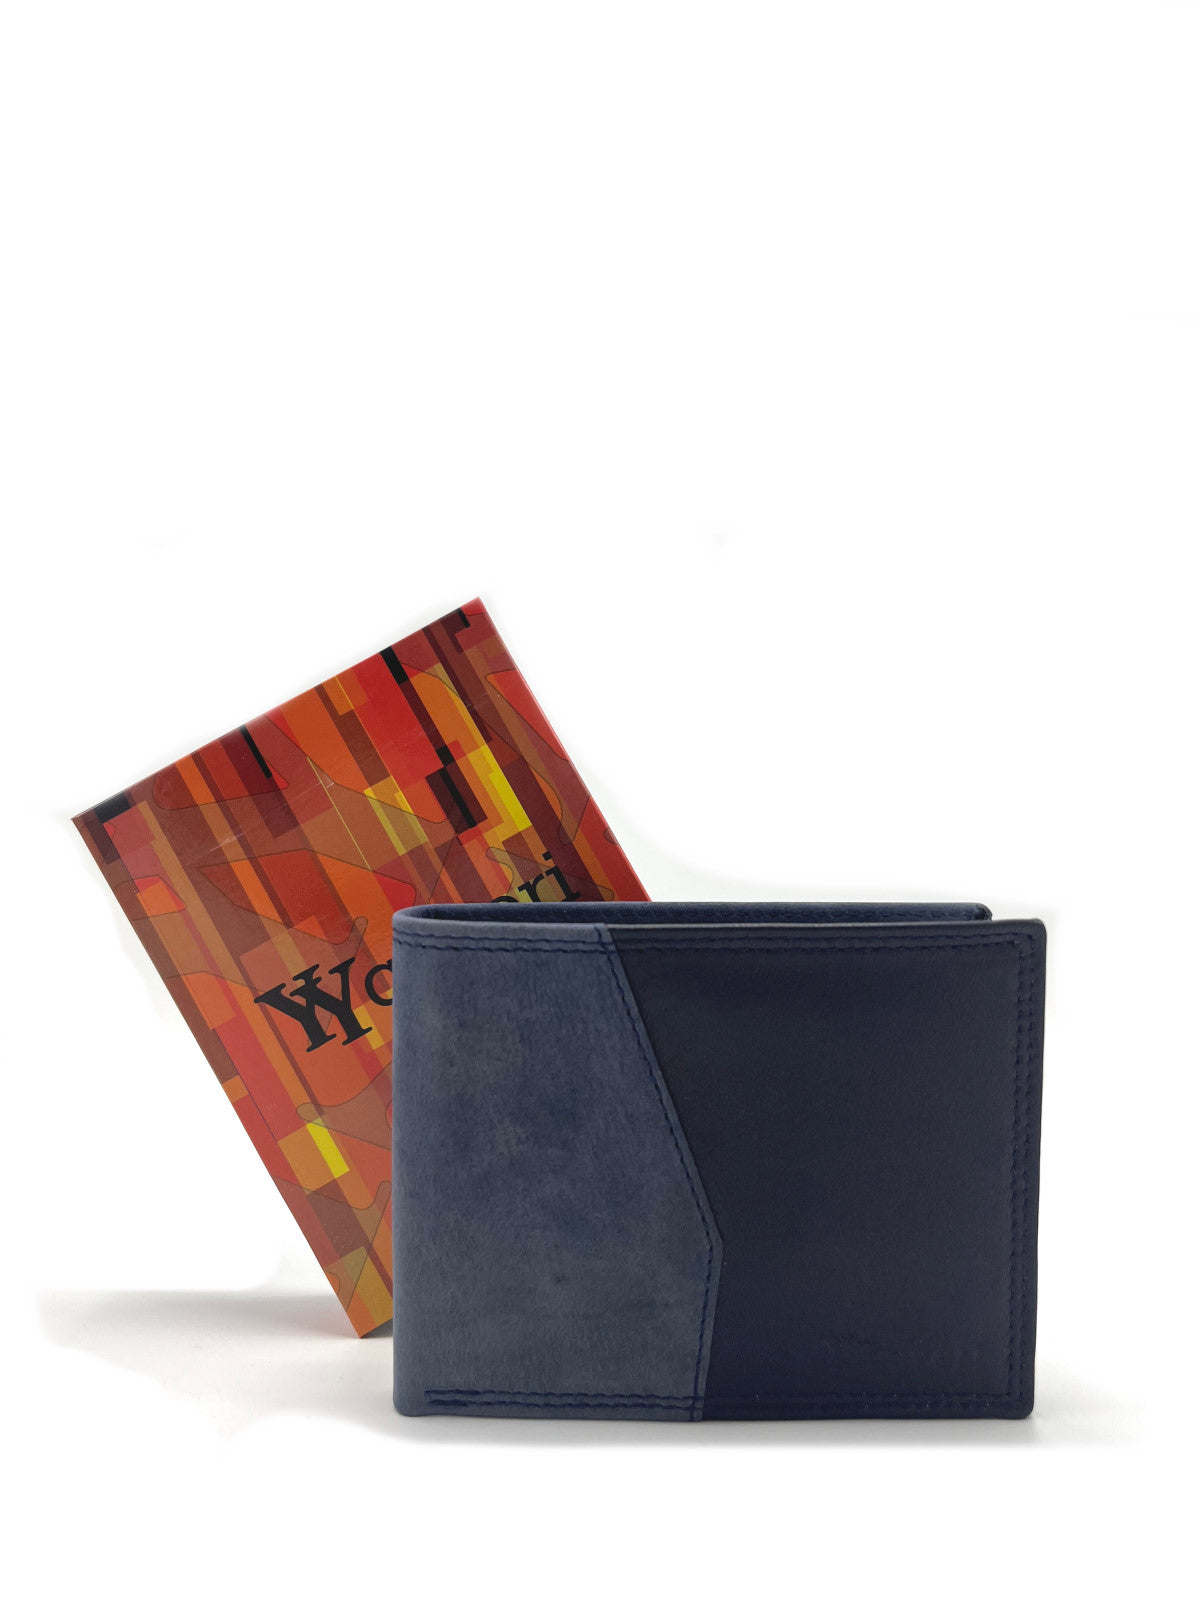 Genuine leather wallet for men, Brand You Young Coveri, art. NETT1144.422